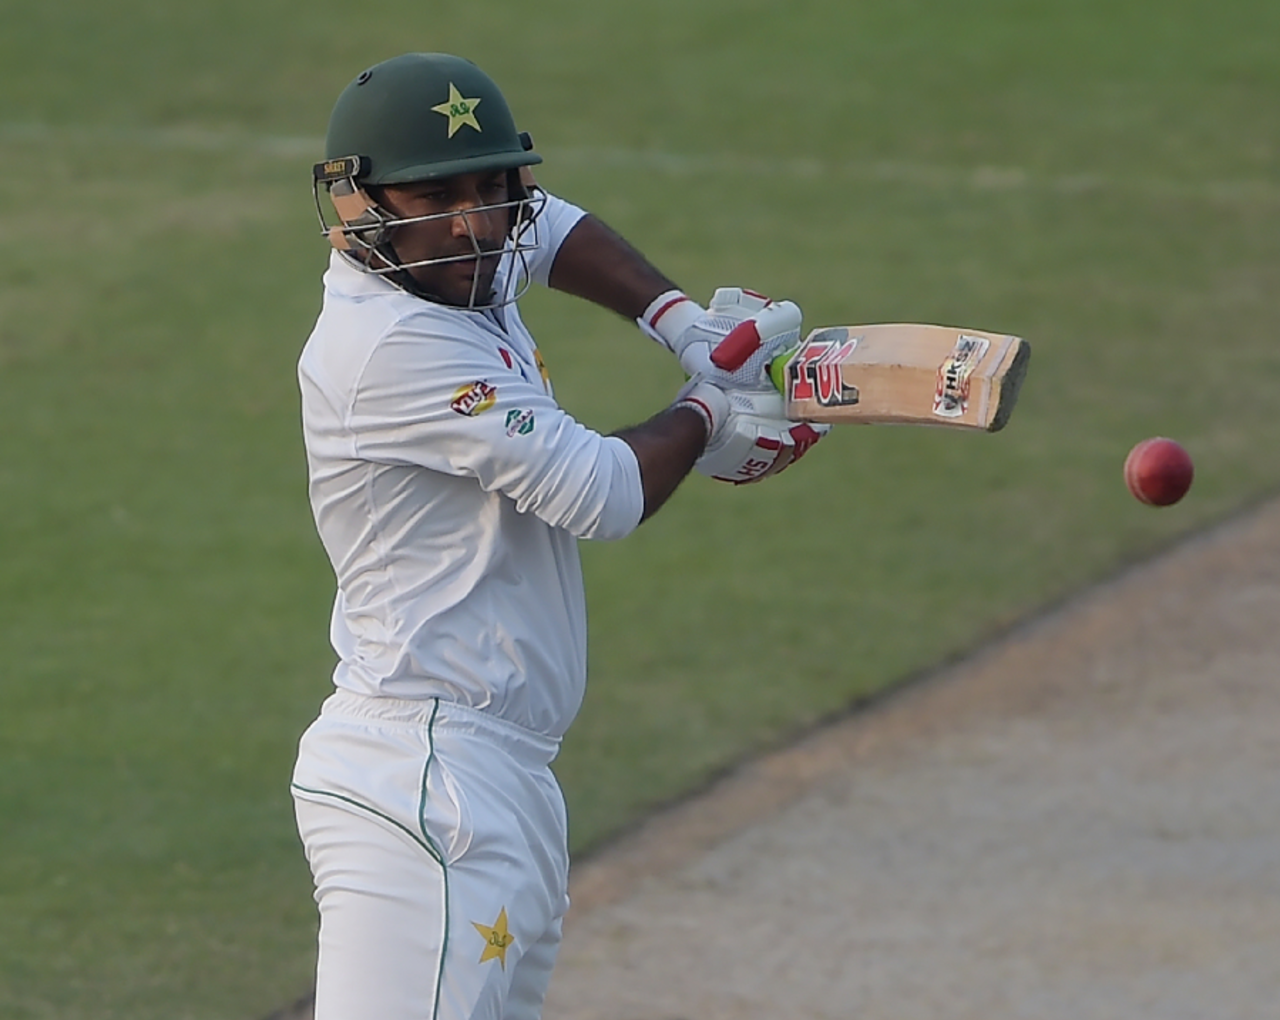 Sarfraz Ahmed stands tall as he cuts one behind square, Pakistan v West Indies, 3rd Test, Sharjah, 3rd day, November 1, 2016